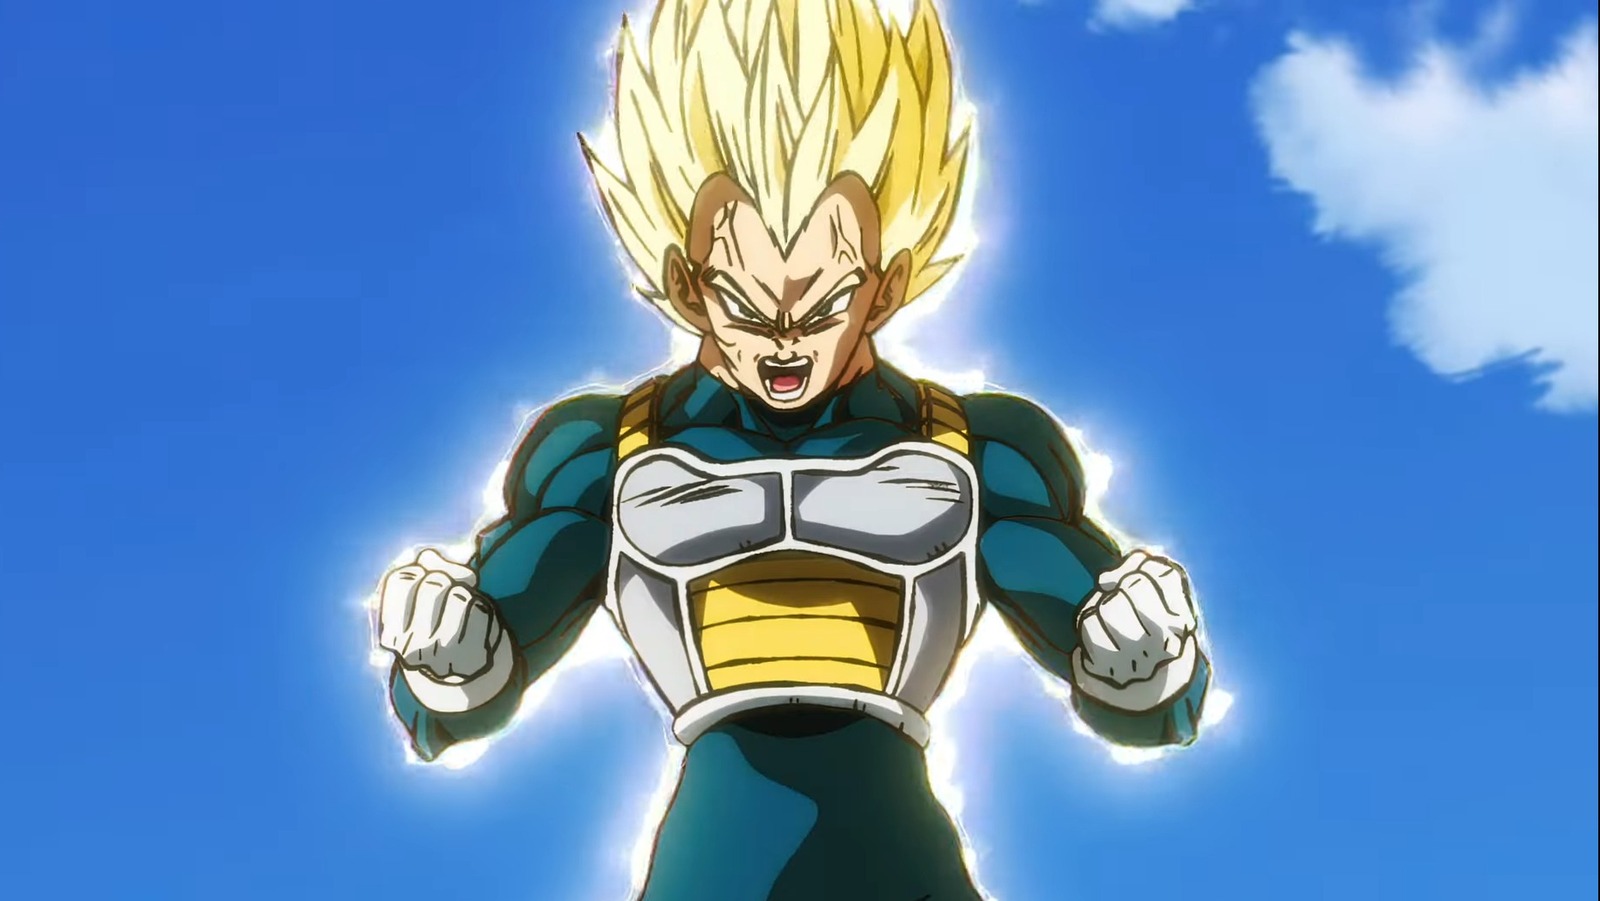 https://www.looper.com/img/gallery/dragon-balls-most-powerful-super-saiyan-form-is-officially-unauthorized/l-intro-1693945812.jpg